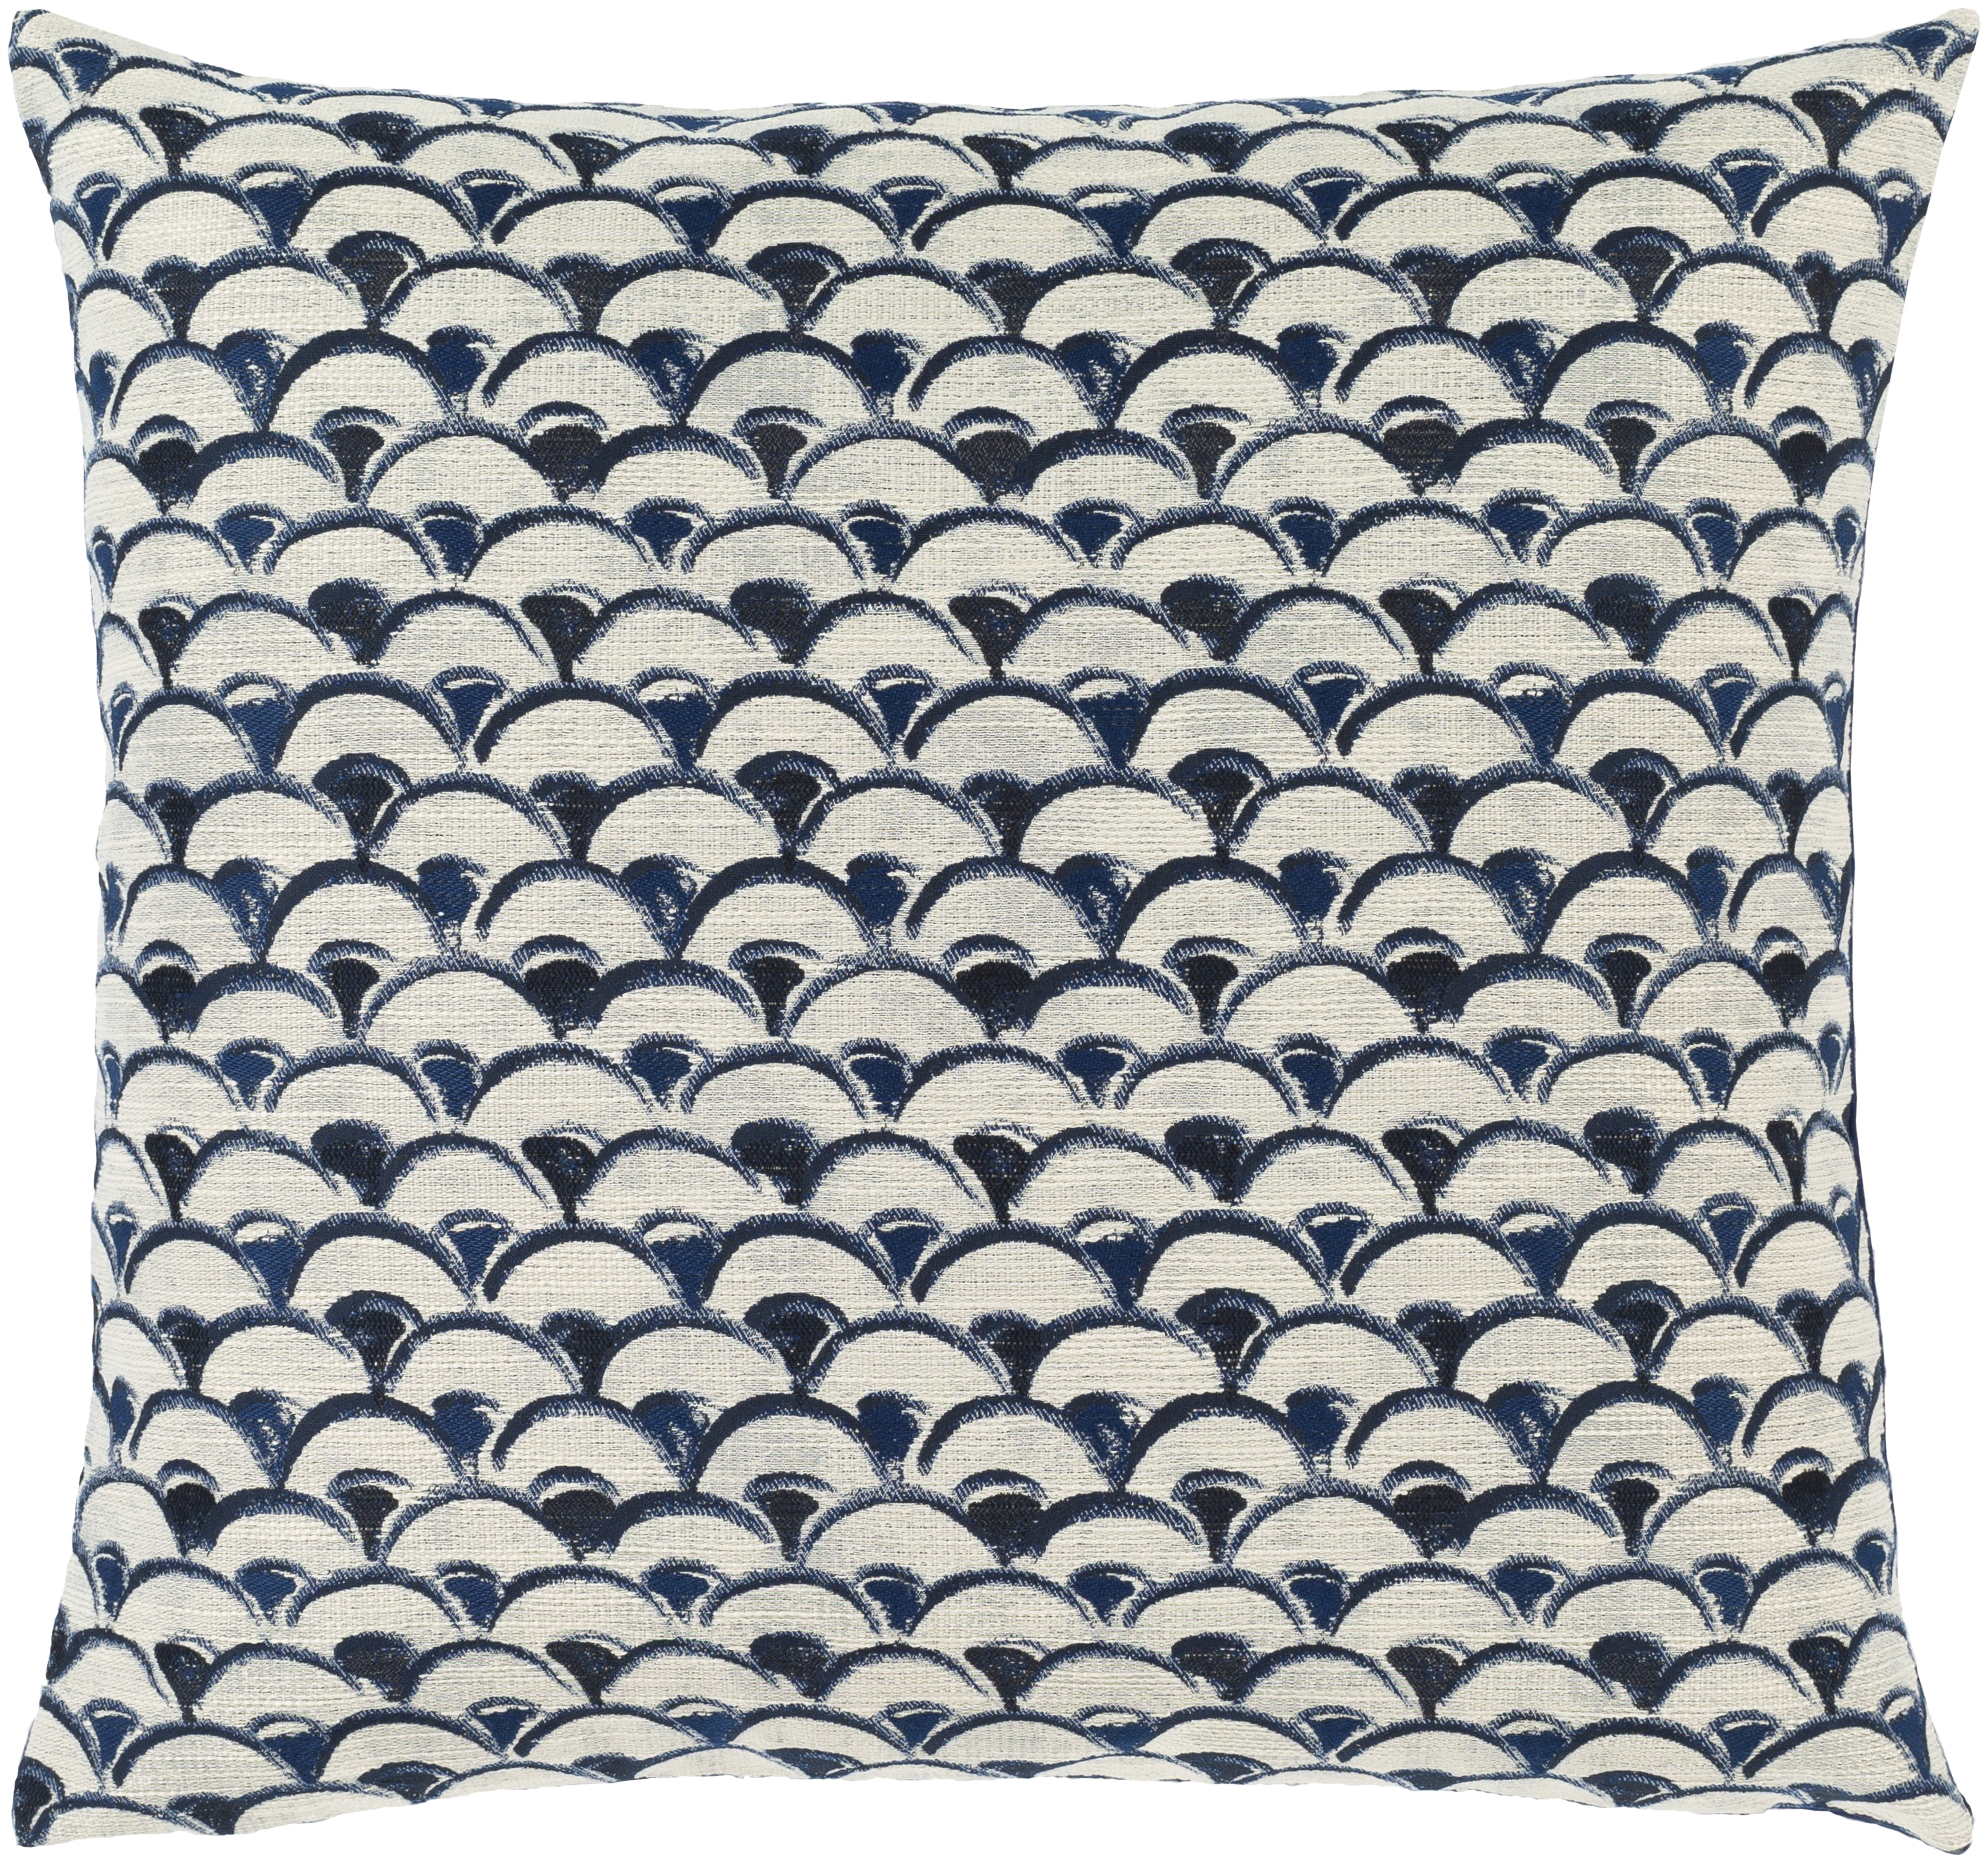 Sanya Bay Throw Pillow, 18" x 18", pillow cover only - Image 0